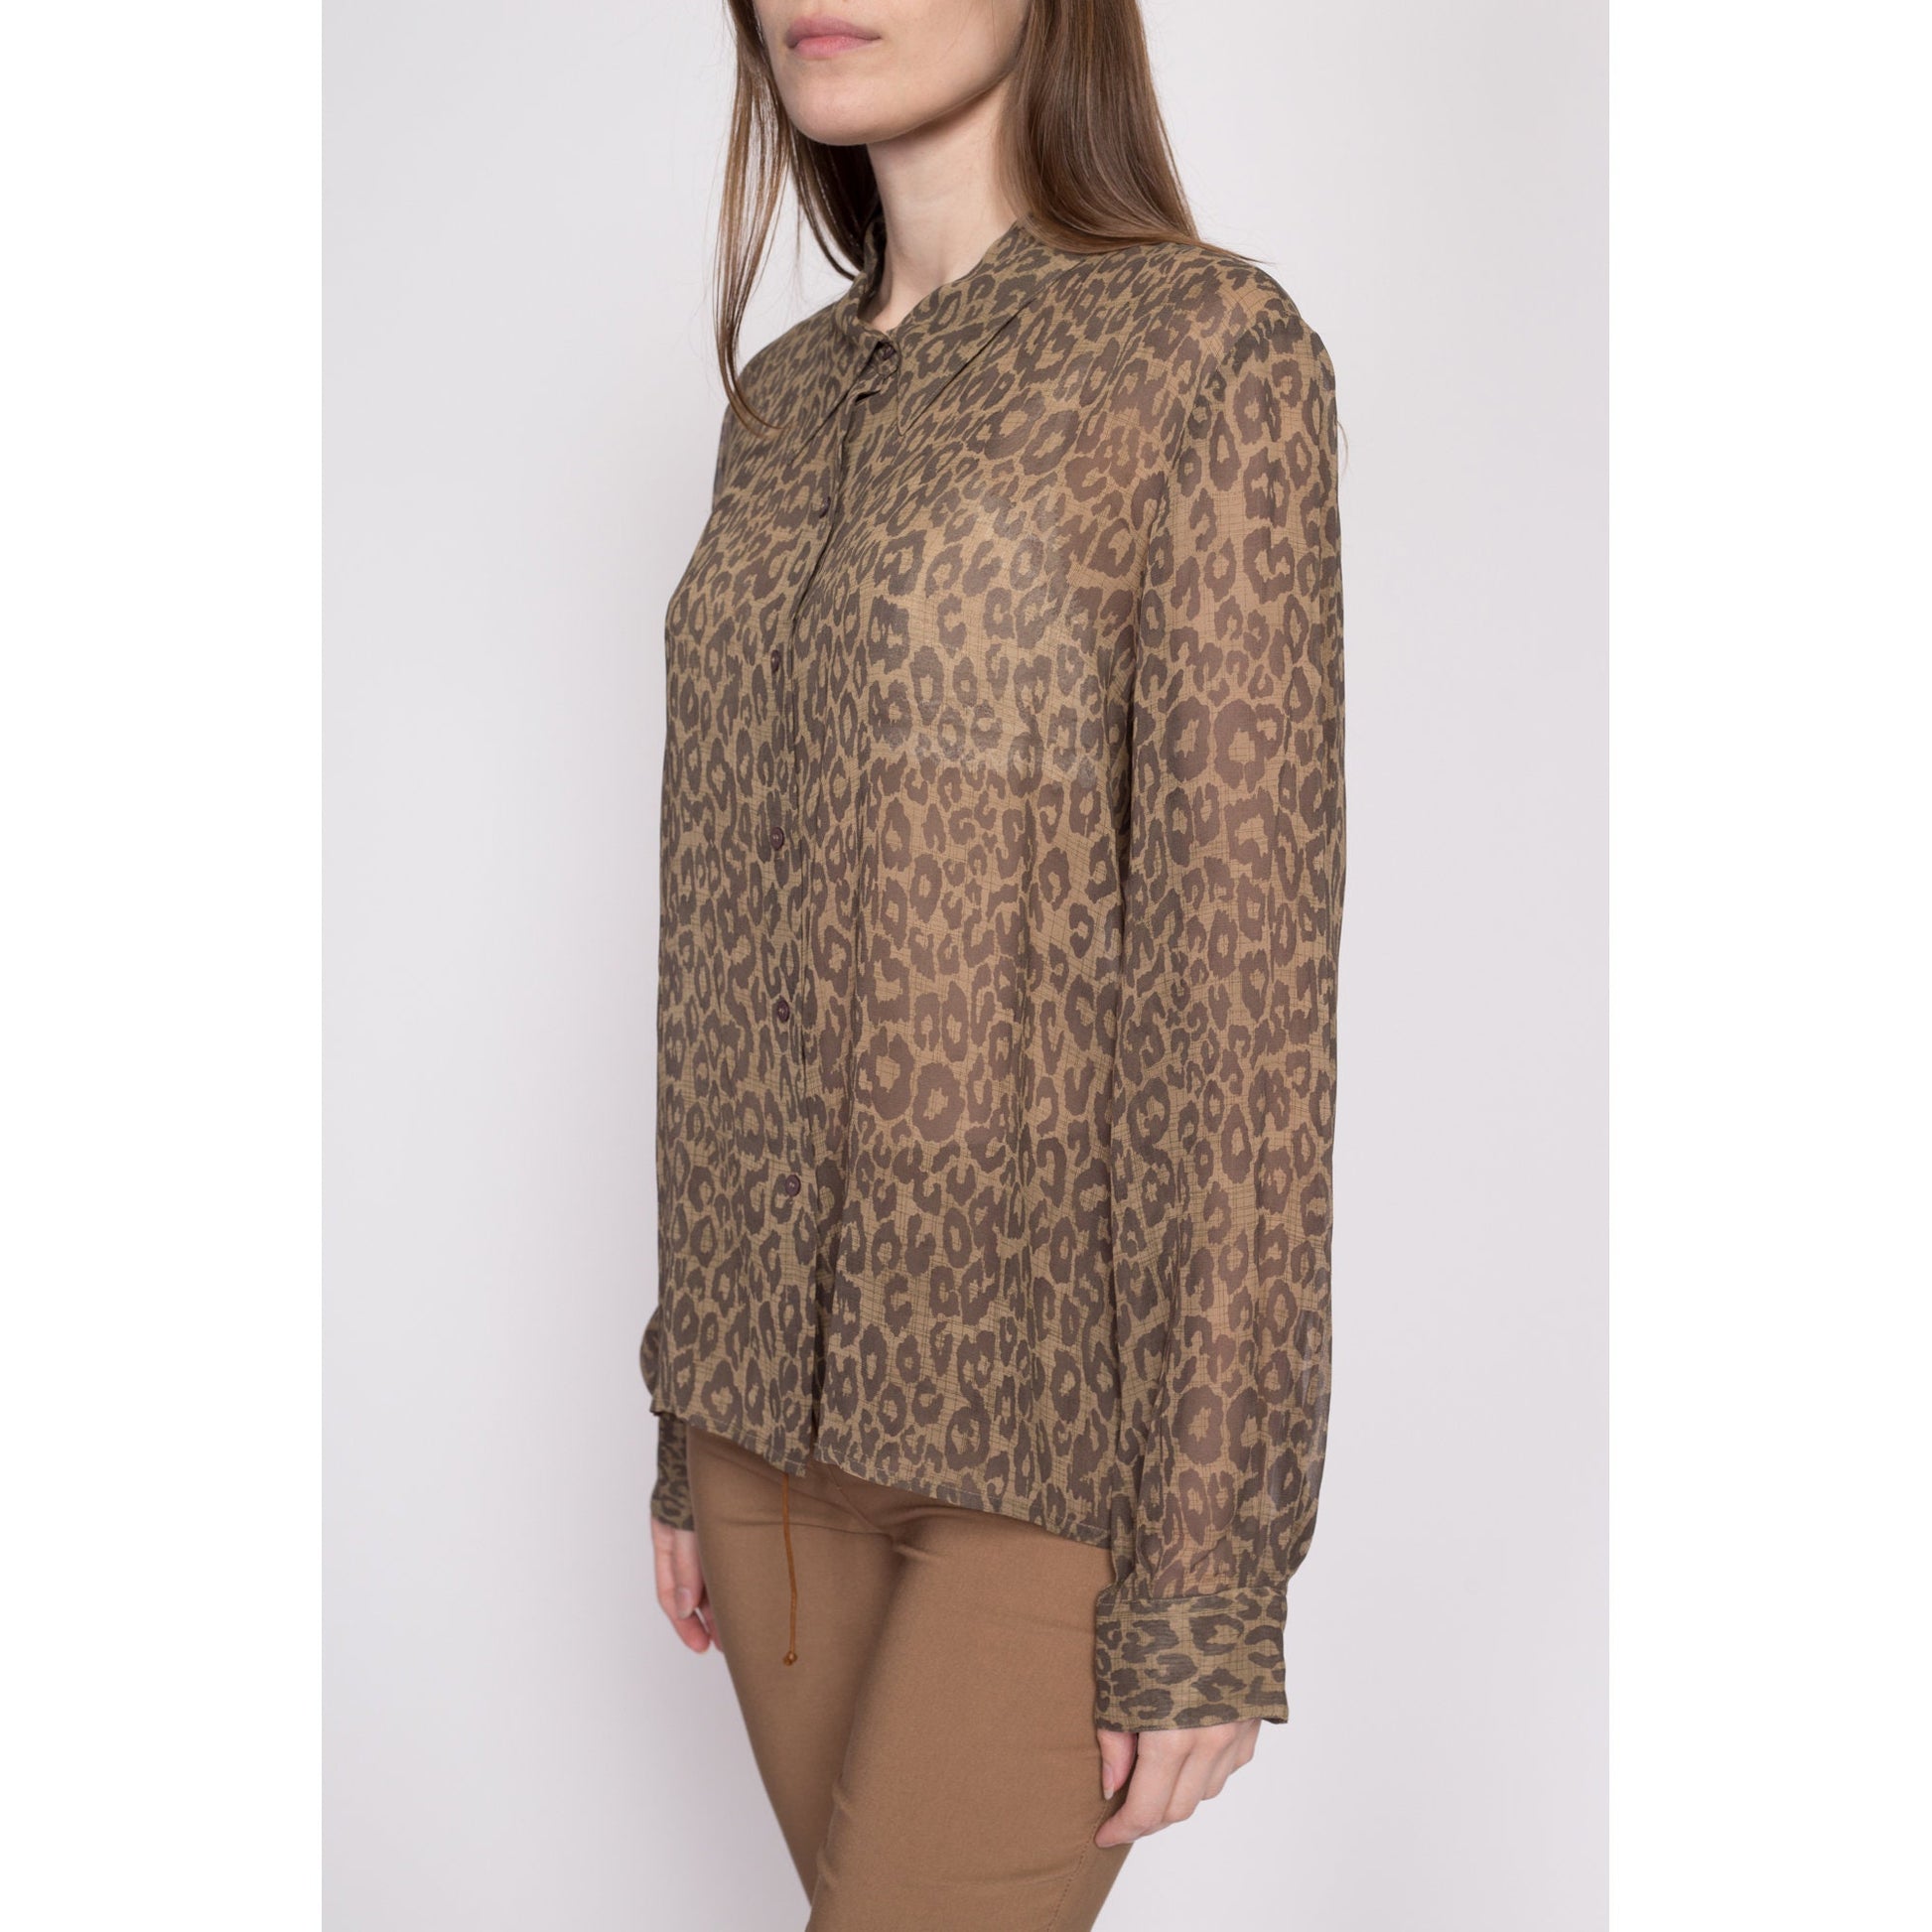 90s Silk Sheer Leopard Print Blouse - Extra Large | Vintage Long Sleeve Collared Button Up Top